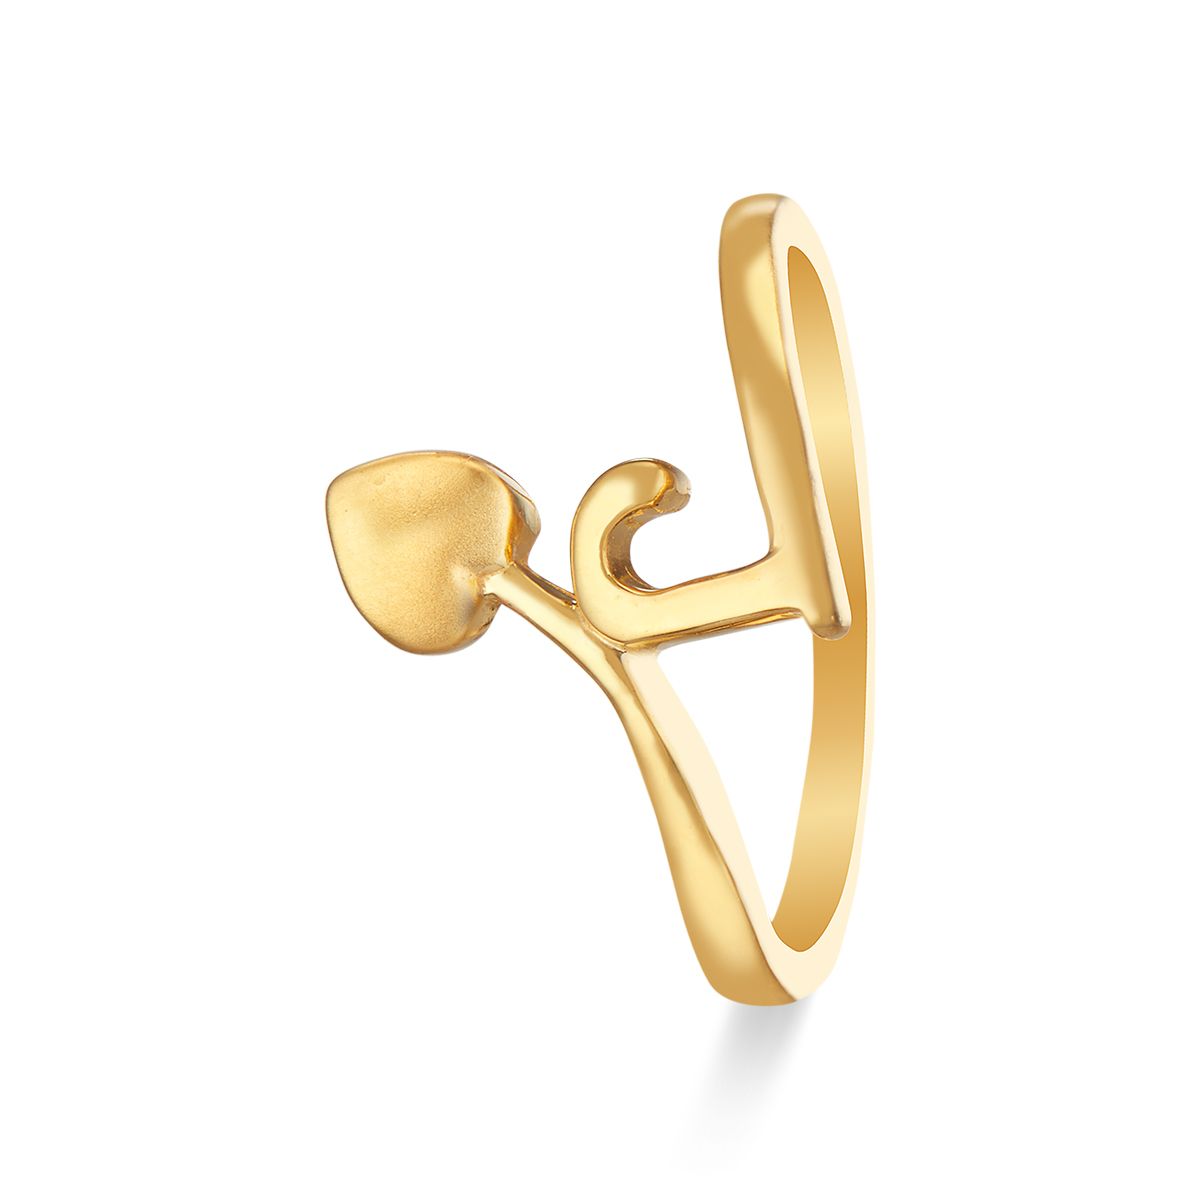 European Brand Gold Plated D Letter Ring With Vintage Pearl Charms High  Quality Pearl Band Ring For Weddings, Parties, And Retro Luxury Costume  Jewelry From Dhgaterb, $3.82 | DHgate.Com